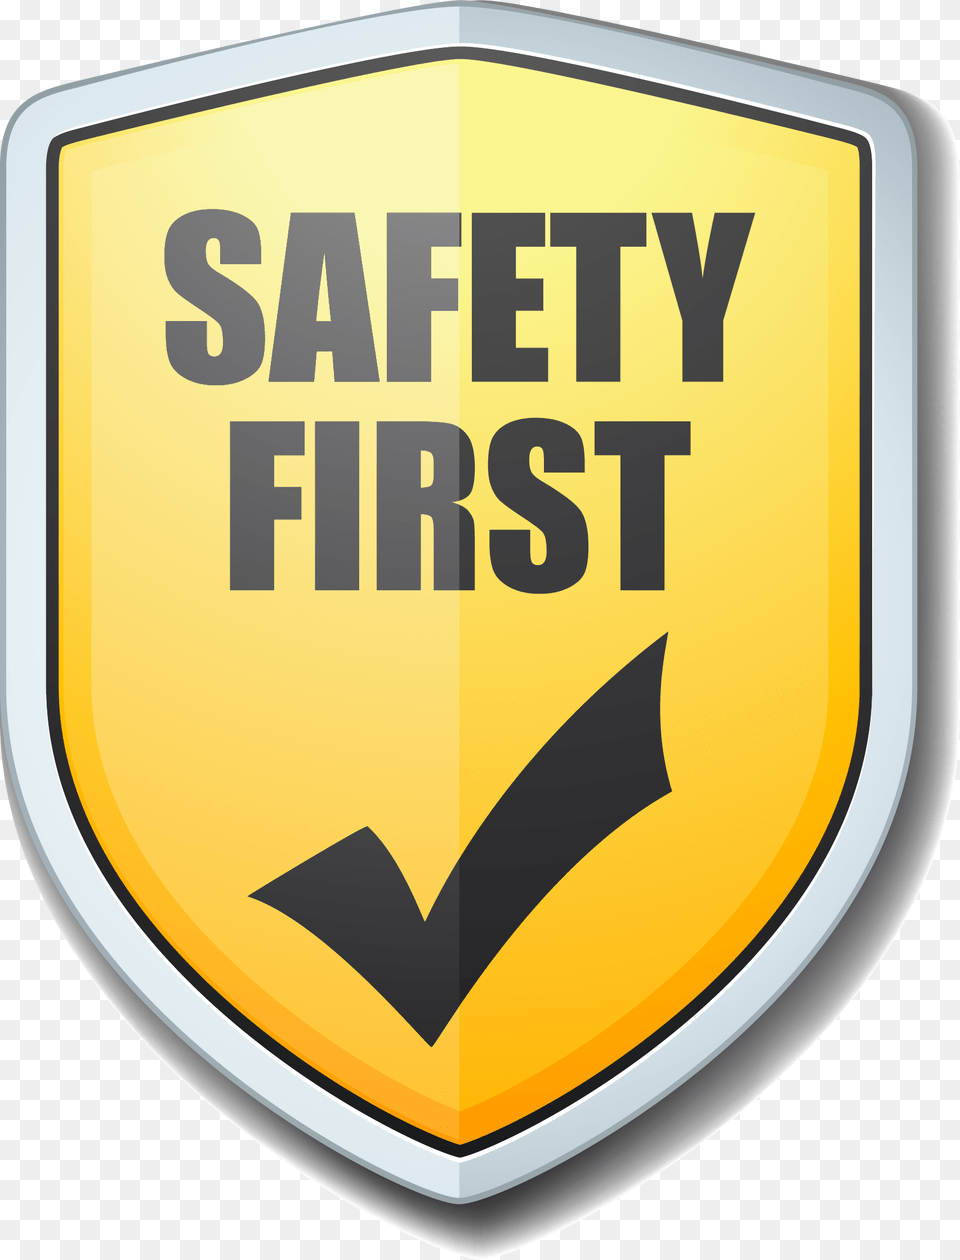 Efficiently And Effectively Using The Latest In Technology Safety First Logo, Badge, Symbol, Armor Png Image